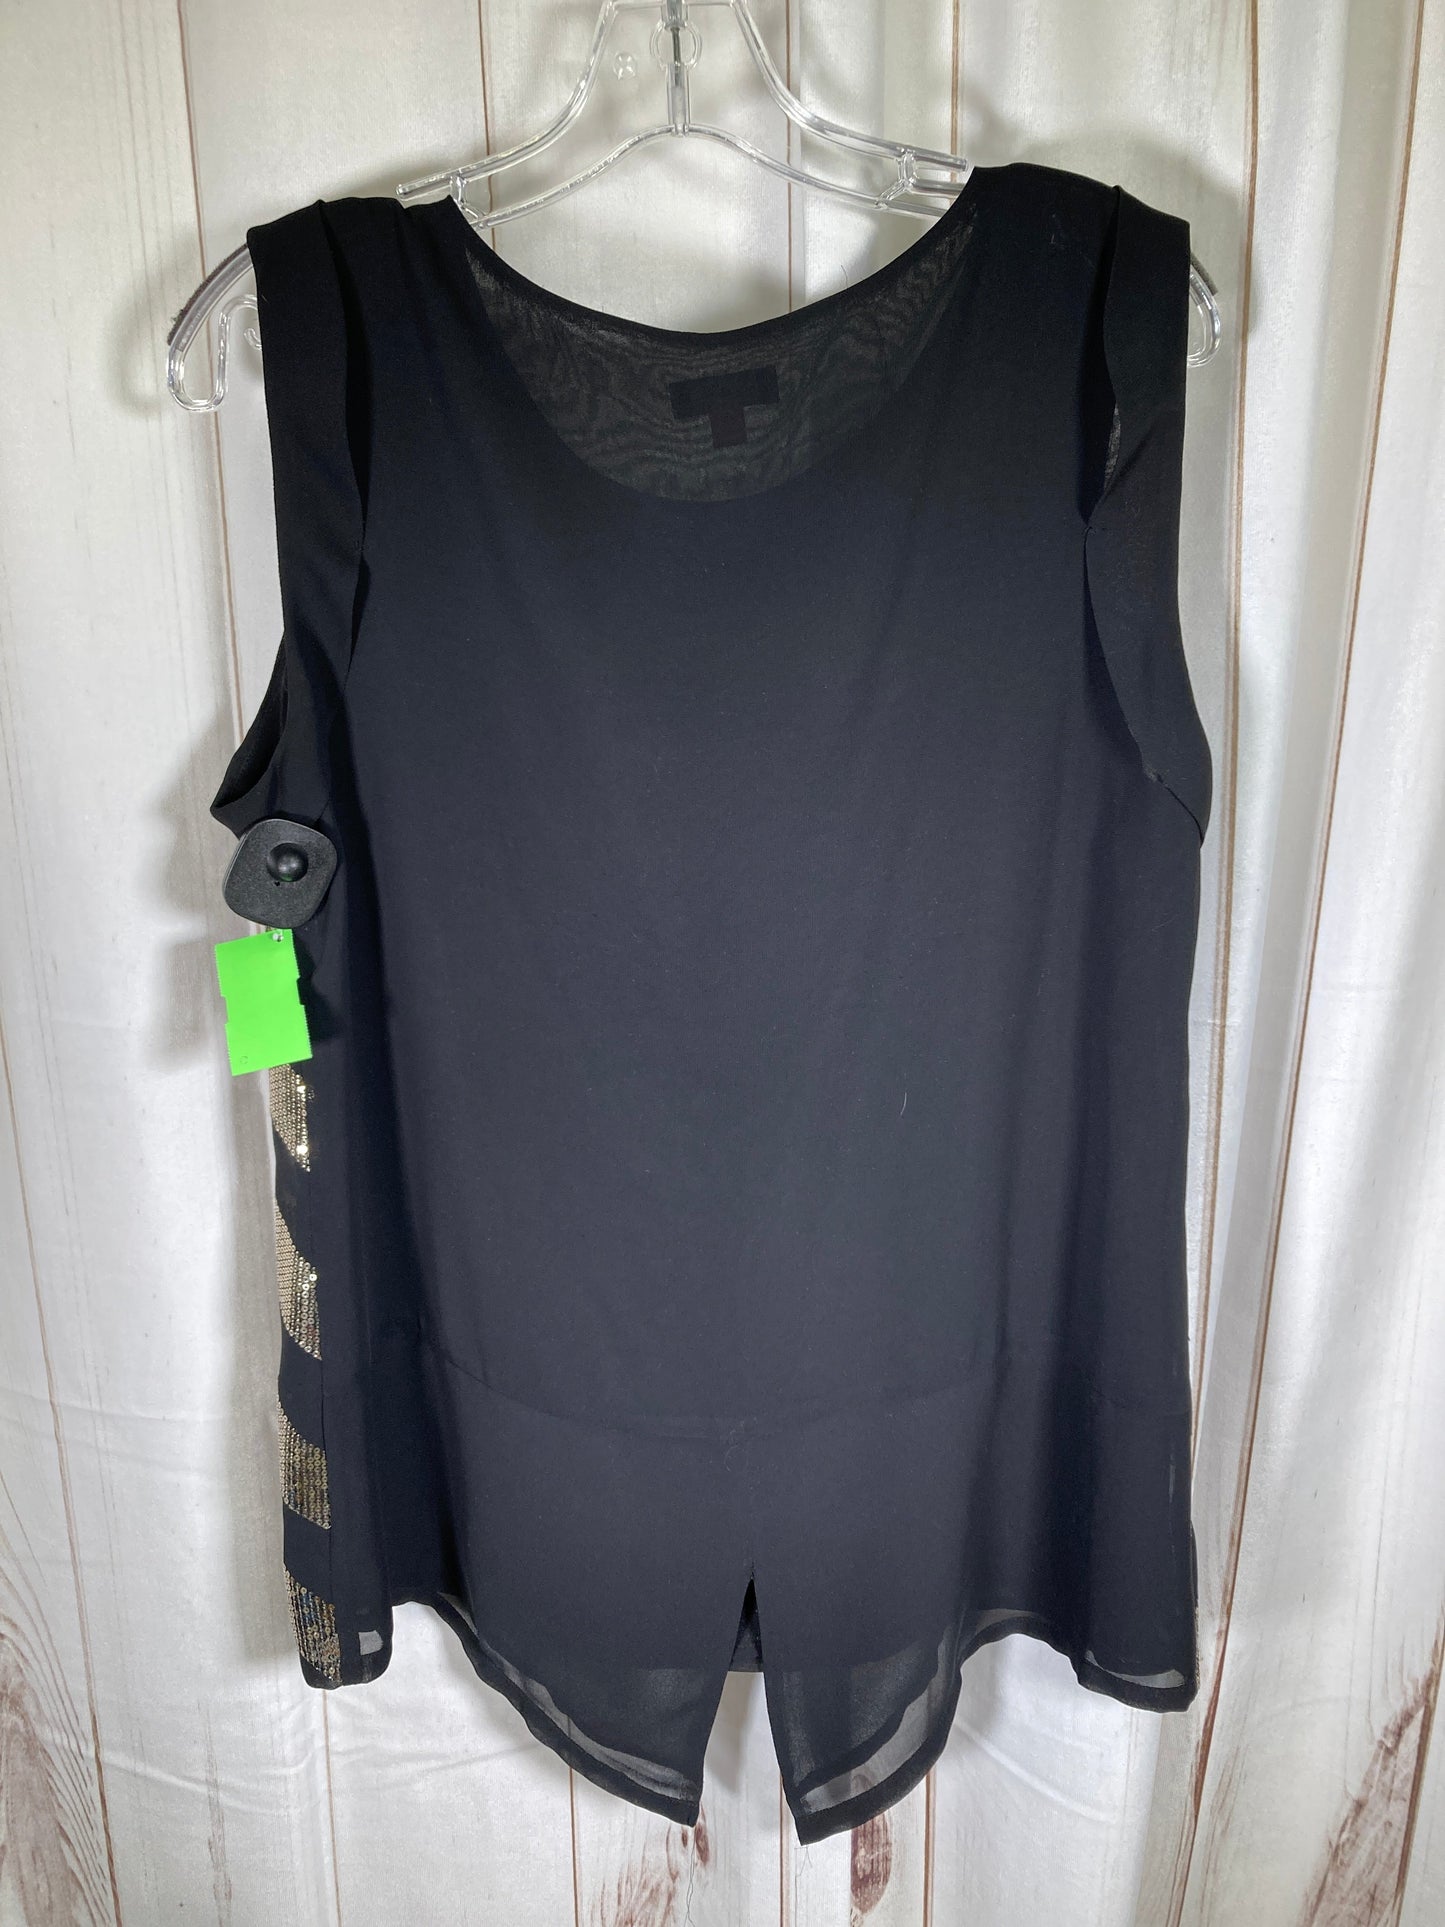 Top Sleeveless By Vince Camuto  Size: Petite L